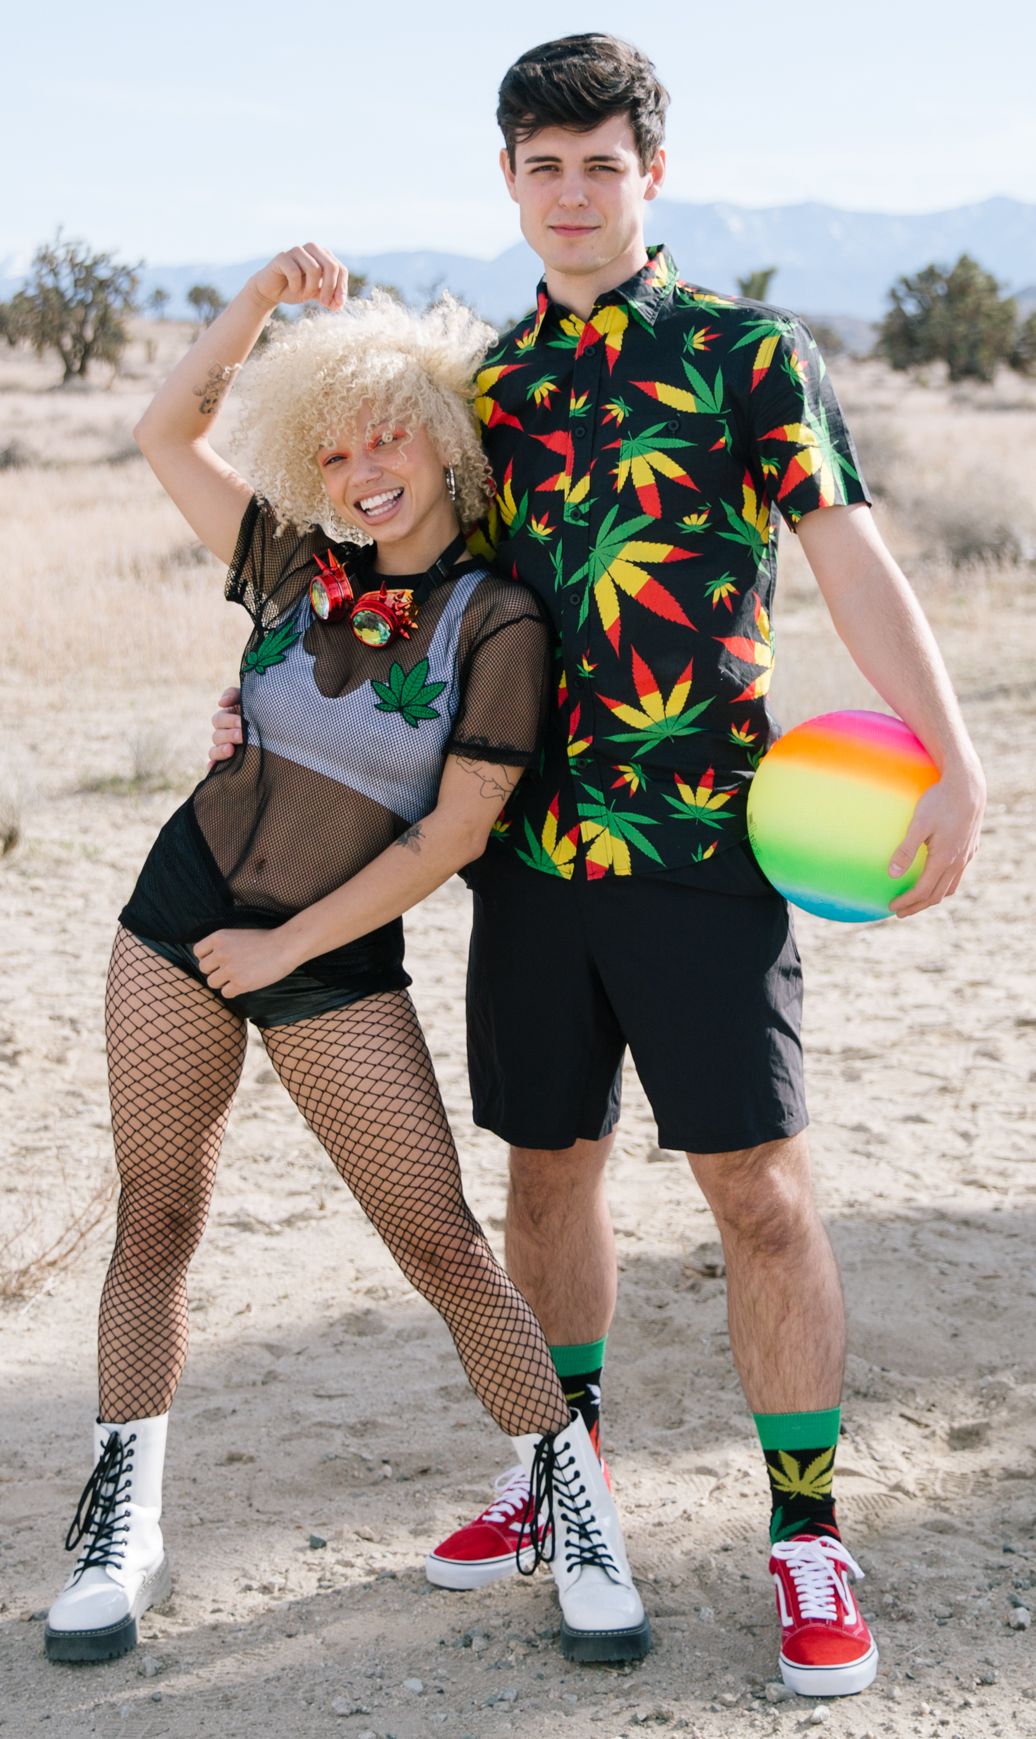 Couples that match festival outfits together, stay together